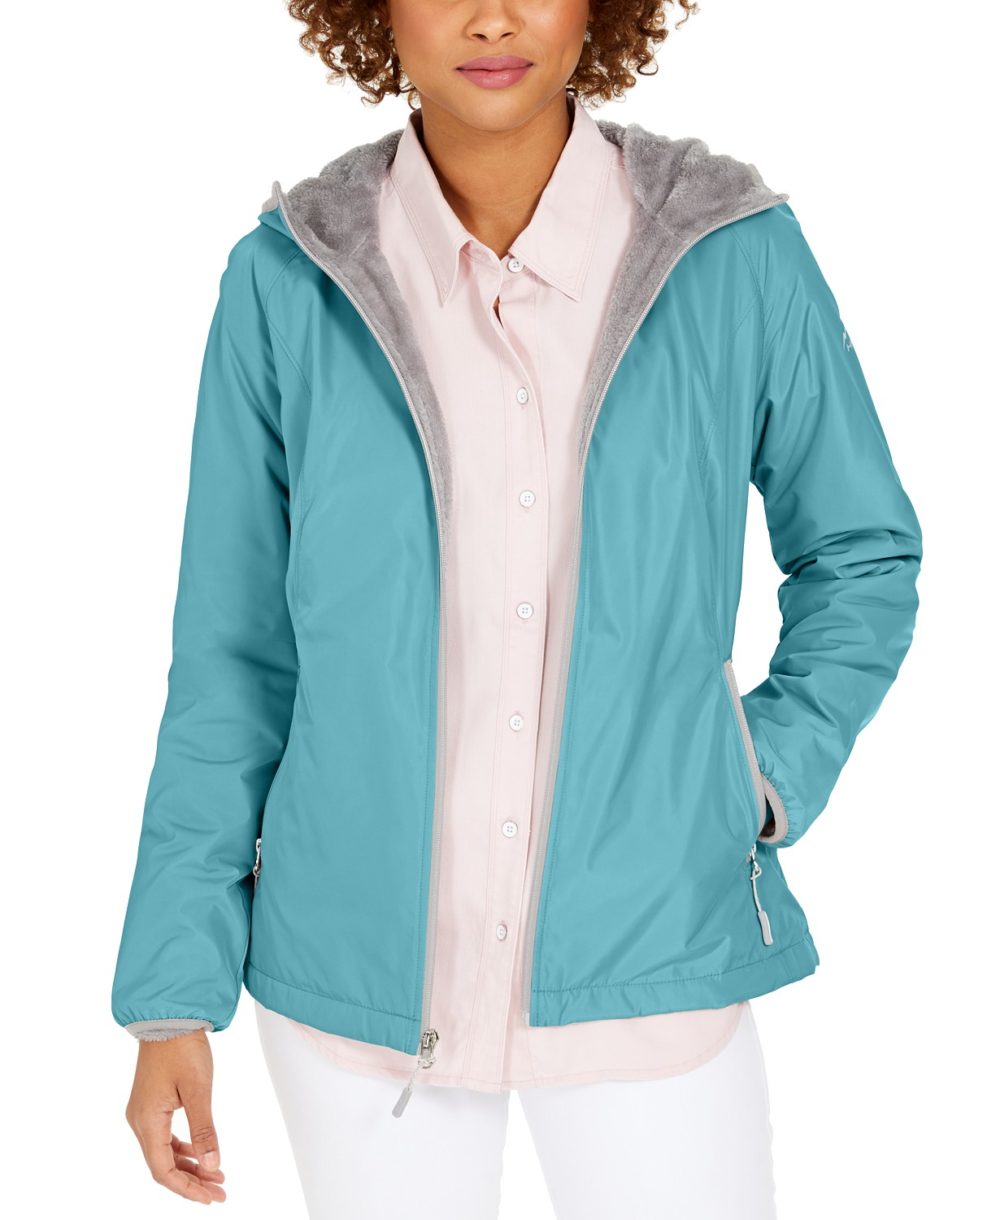 www.couturepoint.com-hfx-womens-mint-faux-fur-lined-hooded-water-resistant-jacket